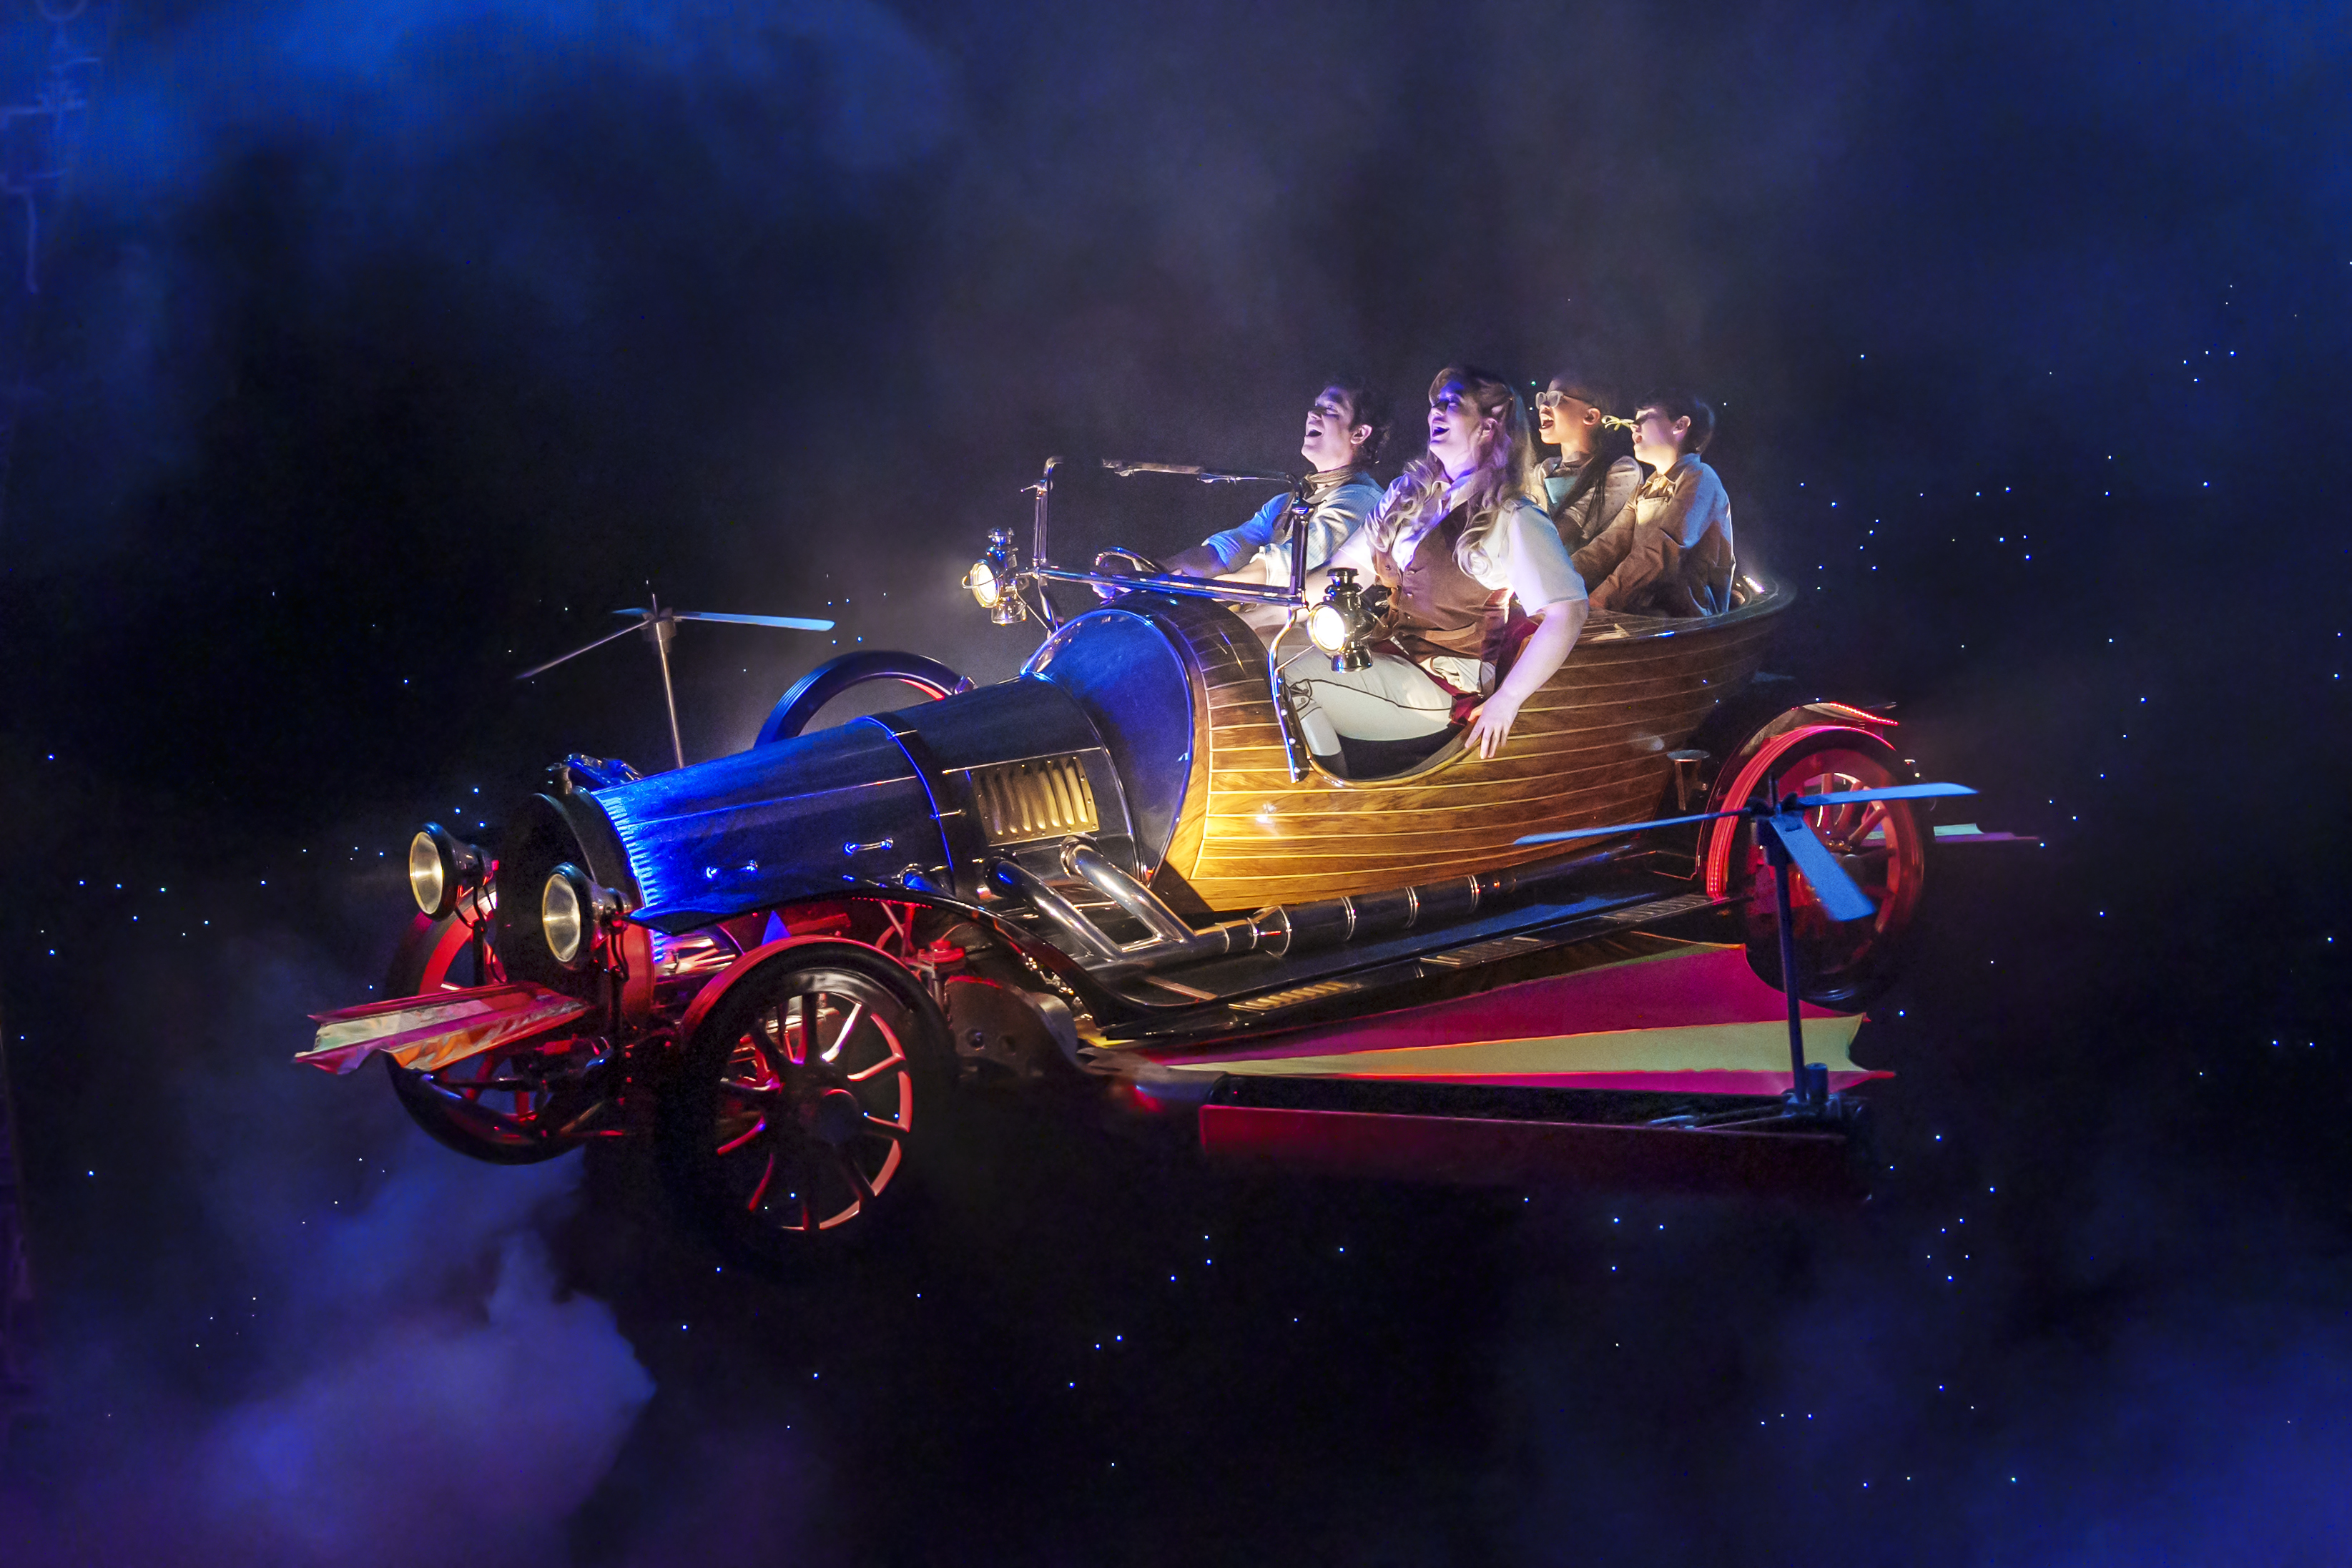 Adam Garcia (as Caractacus Potts), Ellie Nunn (as Truly Scrumptious), Ayrton English (as Jeremy) and Jasmine Nyenya (as Jemima) in a scene from Chitty Chitty Bang Bang on tour